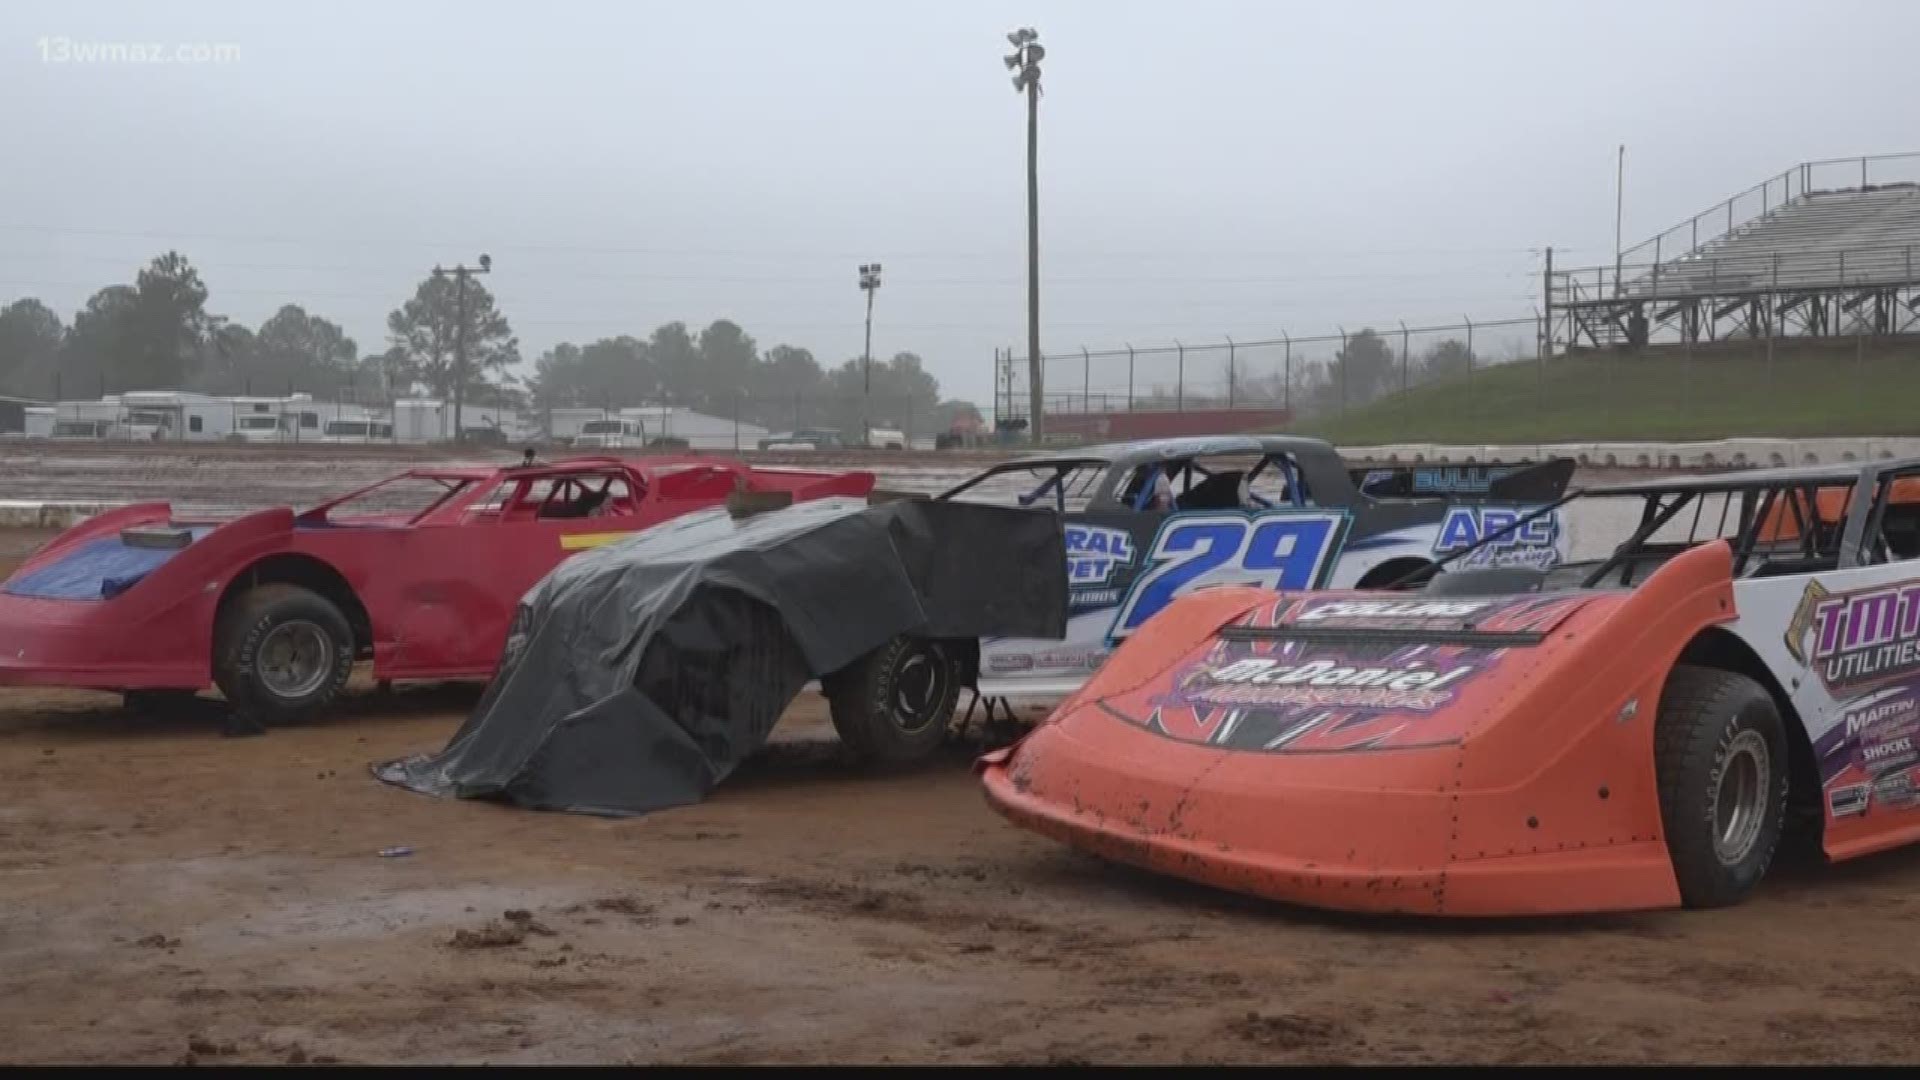 Part of the third annual Battlefield New Year's Bash World Championships was postponed Saturday after some rain.